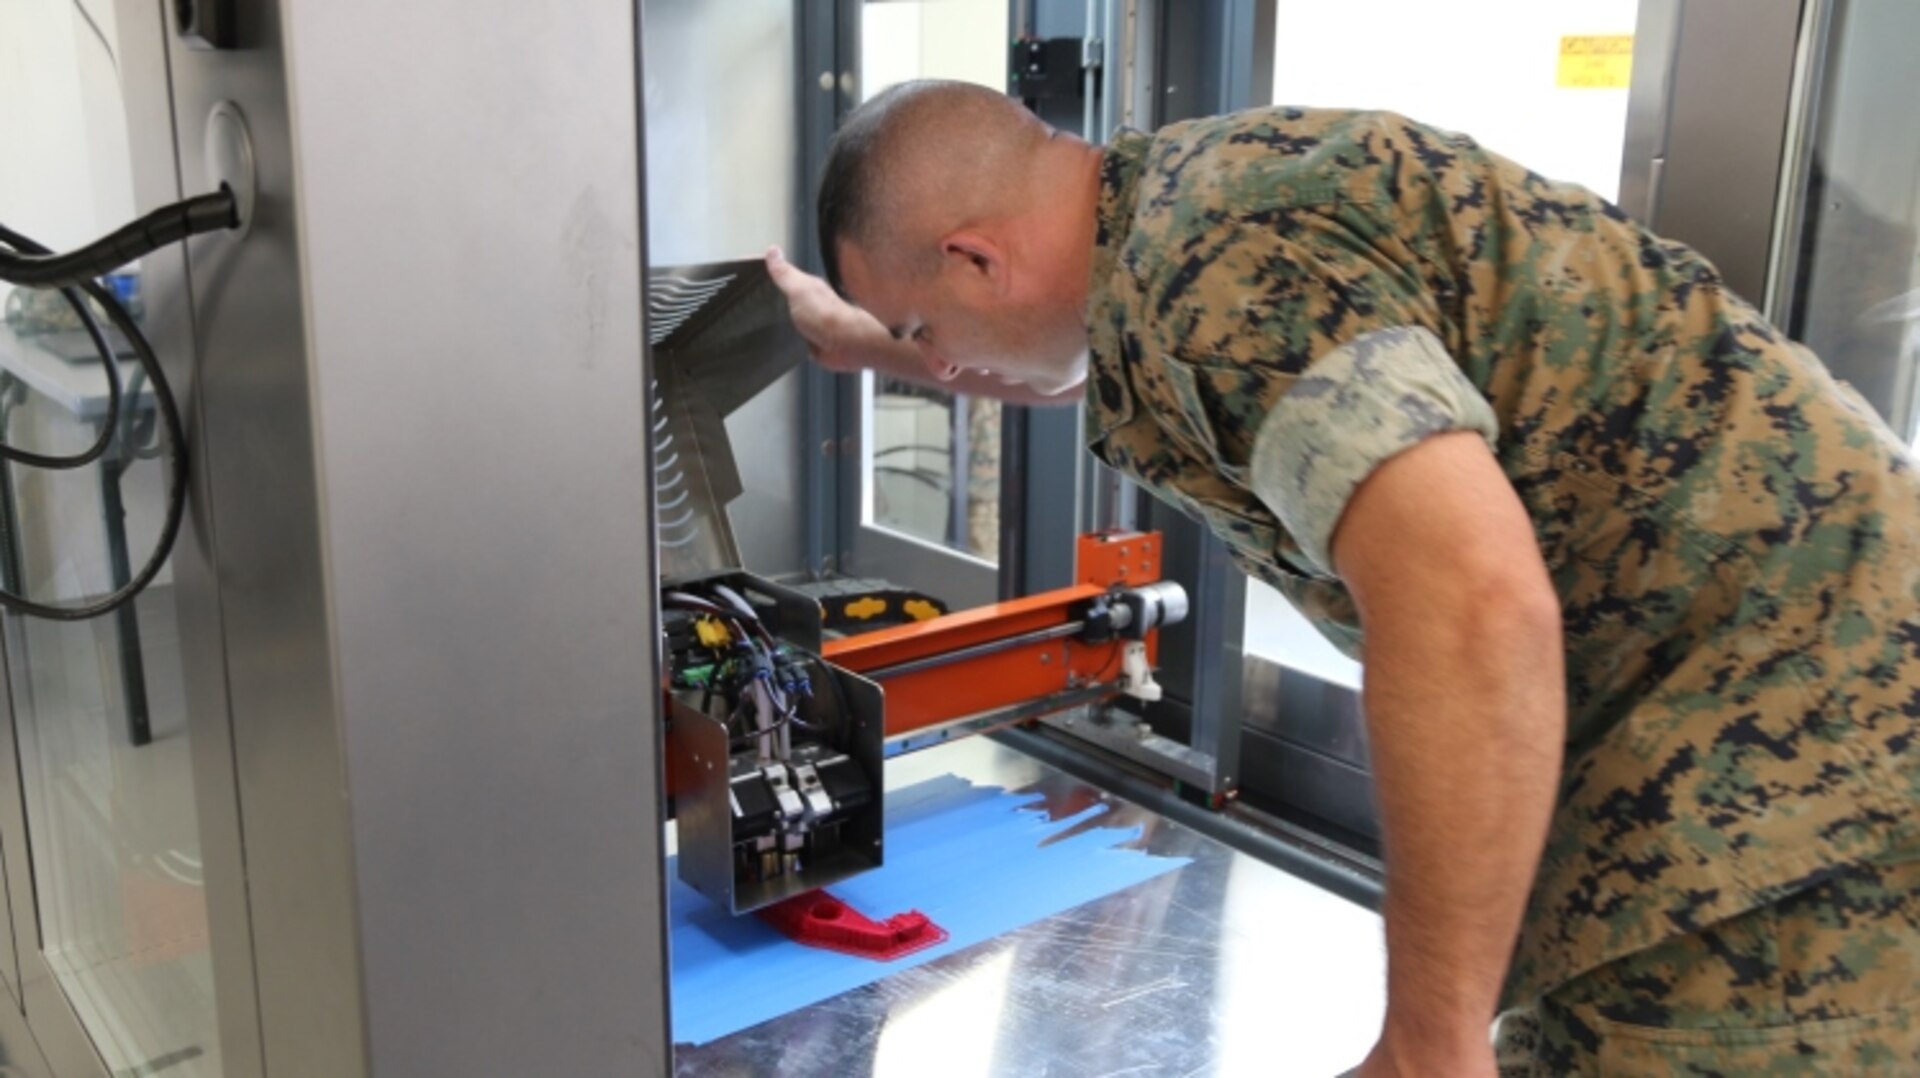 Gunnery Sgt. Doug McCue, a machinist with the 2nd Maintenance Battalion at Camp Lejeune, North Carolina, demonstrates the capabilities of a large-build 3-D printer in the X-FAB Facility Aug. 1. The X-FAB, or Expeditionary Fabrication, Facility is a self-contained, transportable additive manufacturing lab comprised of a 20-by-20-foot shelter, 3-D printers, a scanner and computer-aided design software system that can be used to fabricate repair and replacement parts in the field. (U.S. Marine Corps photo by Kaitlin Kelly)